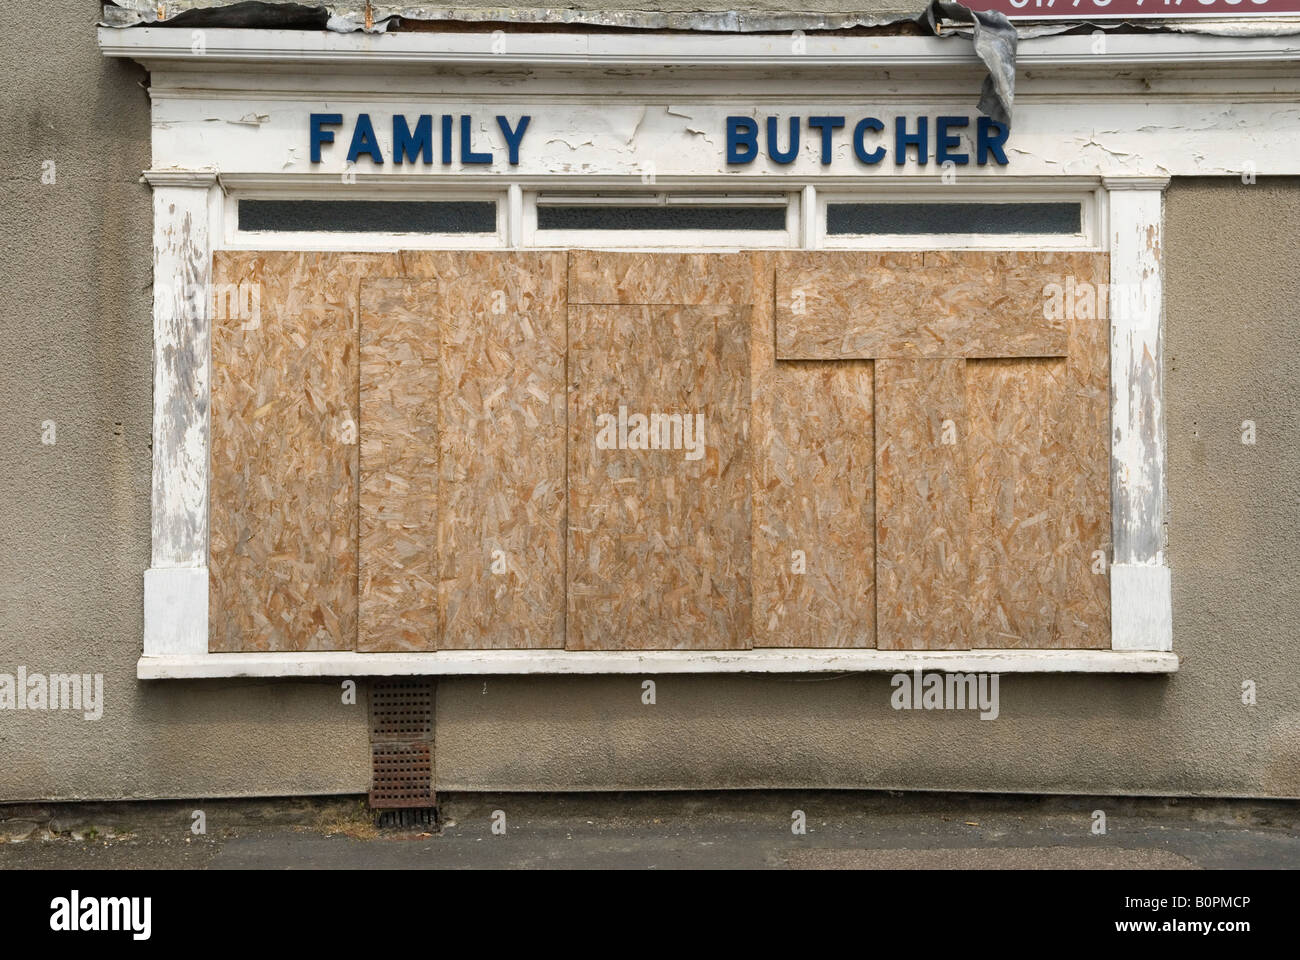 Rural economy family butchers corner shop boarded up closed down, Sutton Bridge Lincolnshire UK 2008 2000s HOMER SYKES Stock Photo